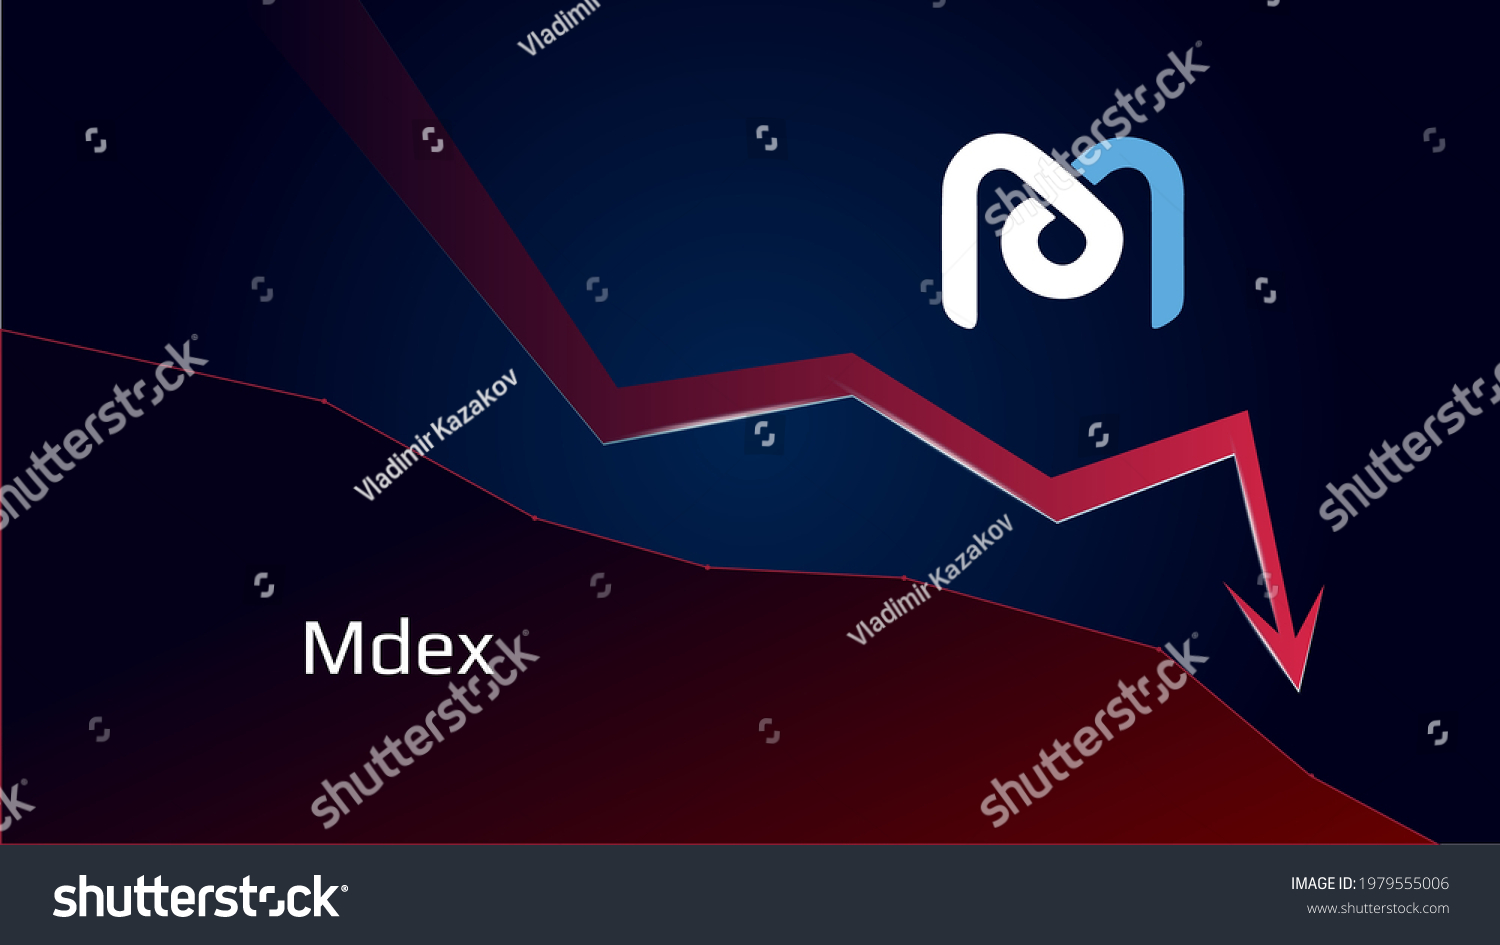 SVG of Mdex MDX in downtrend and price falls down. Cryptocurrency coin symbol and red down arrow. Uniswap crushed and fell down. Cryptocurrency trading crisis and crash. Vector illustration. svg